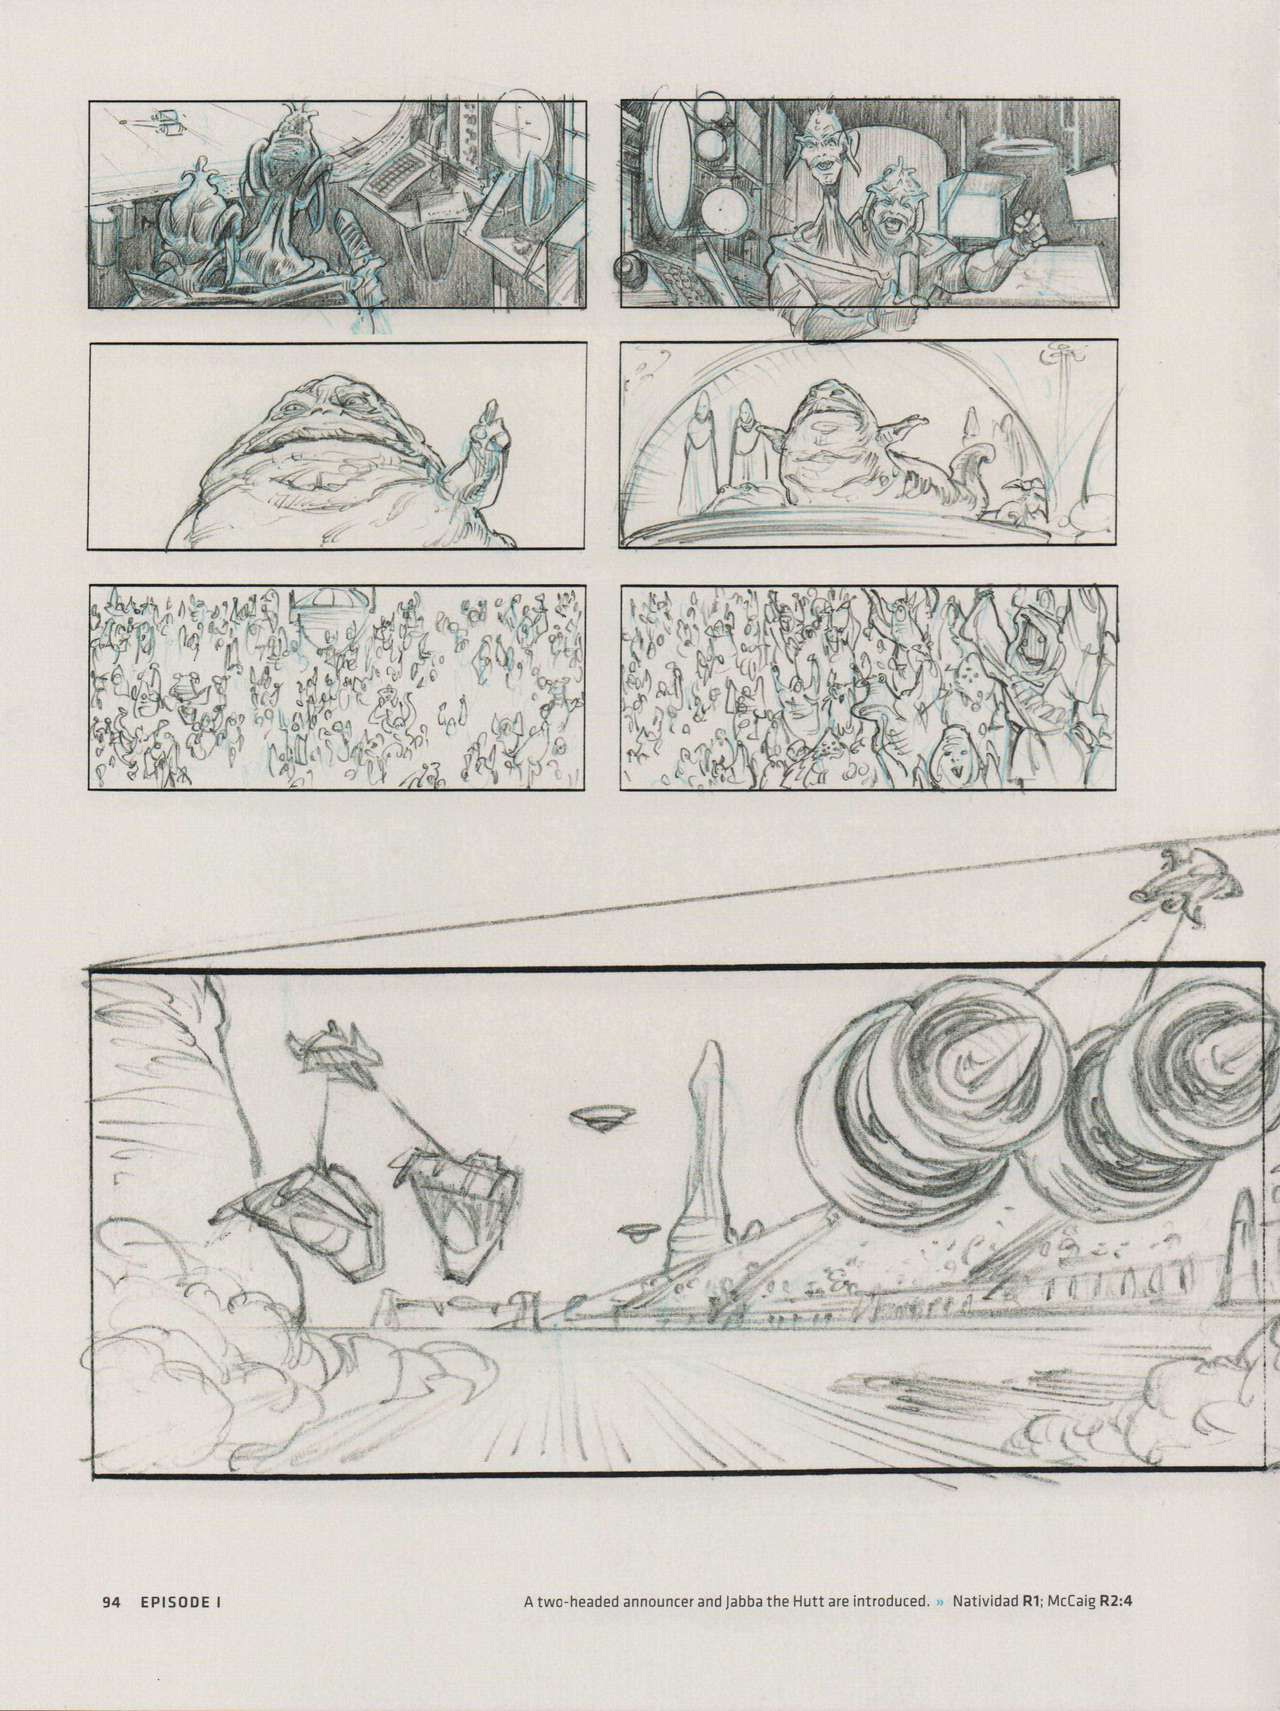 Star Wars Storyboards - The Prequel Trilogy 98